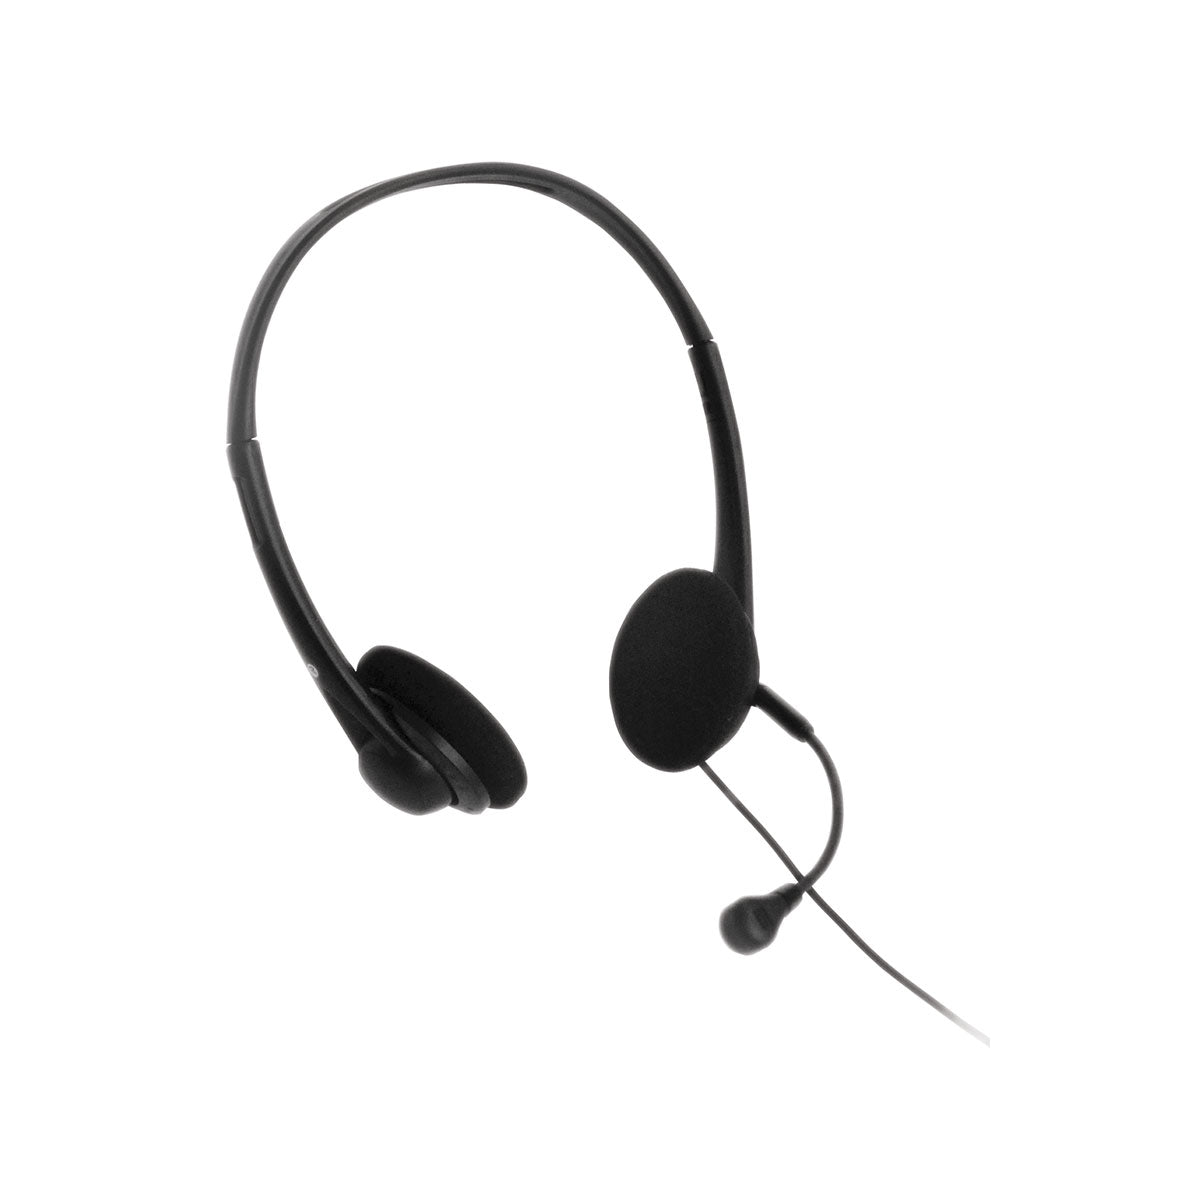 ClearSounds HD500 Telephone Headset